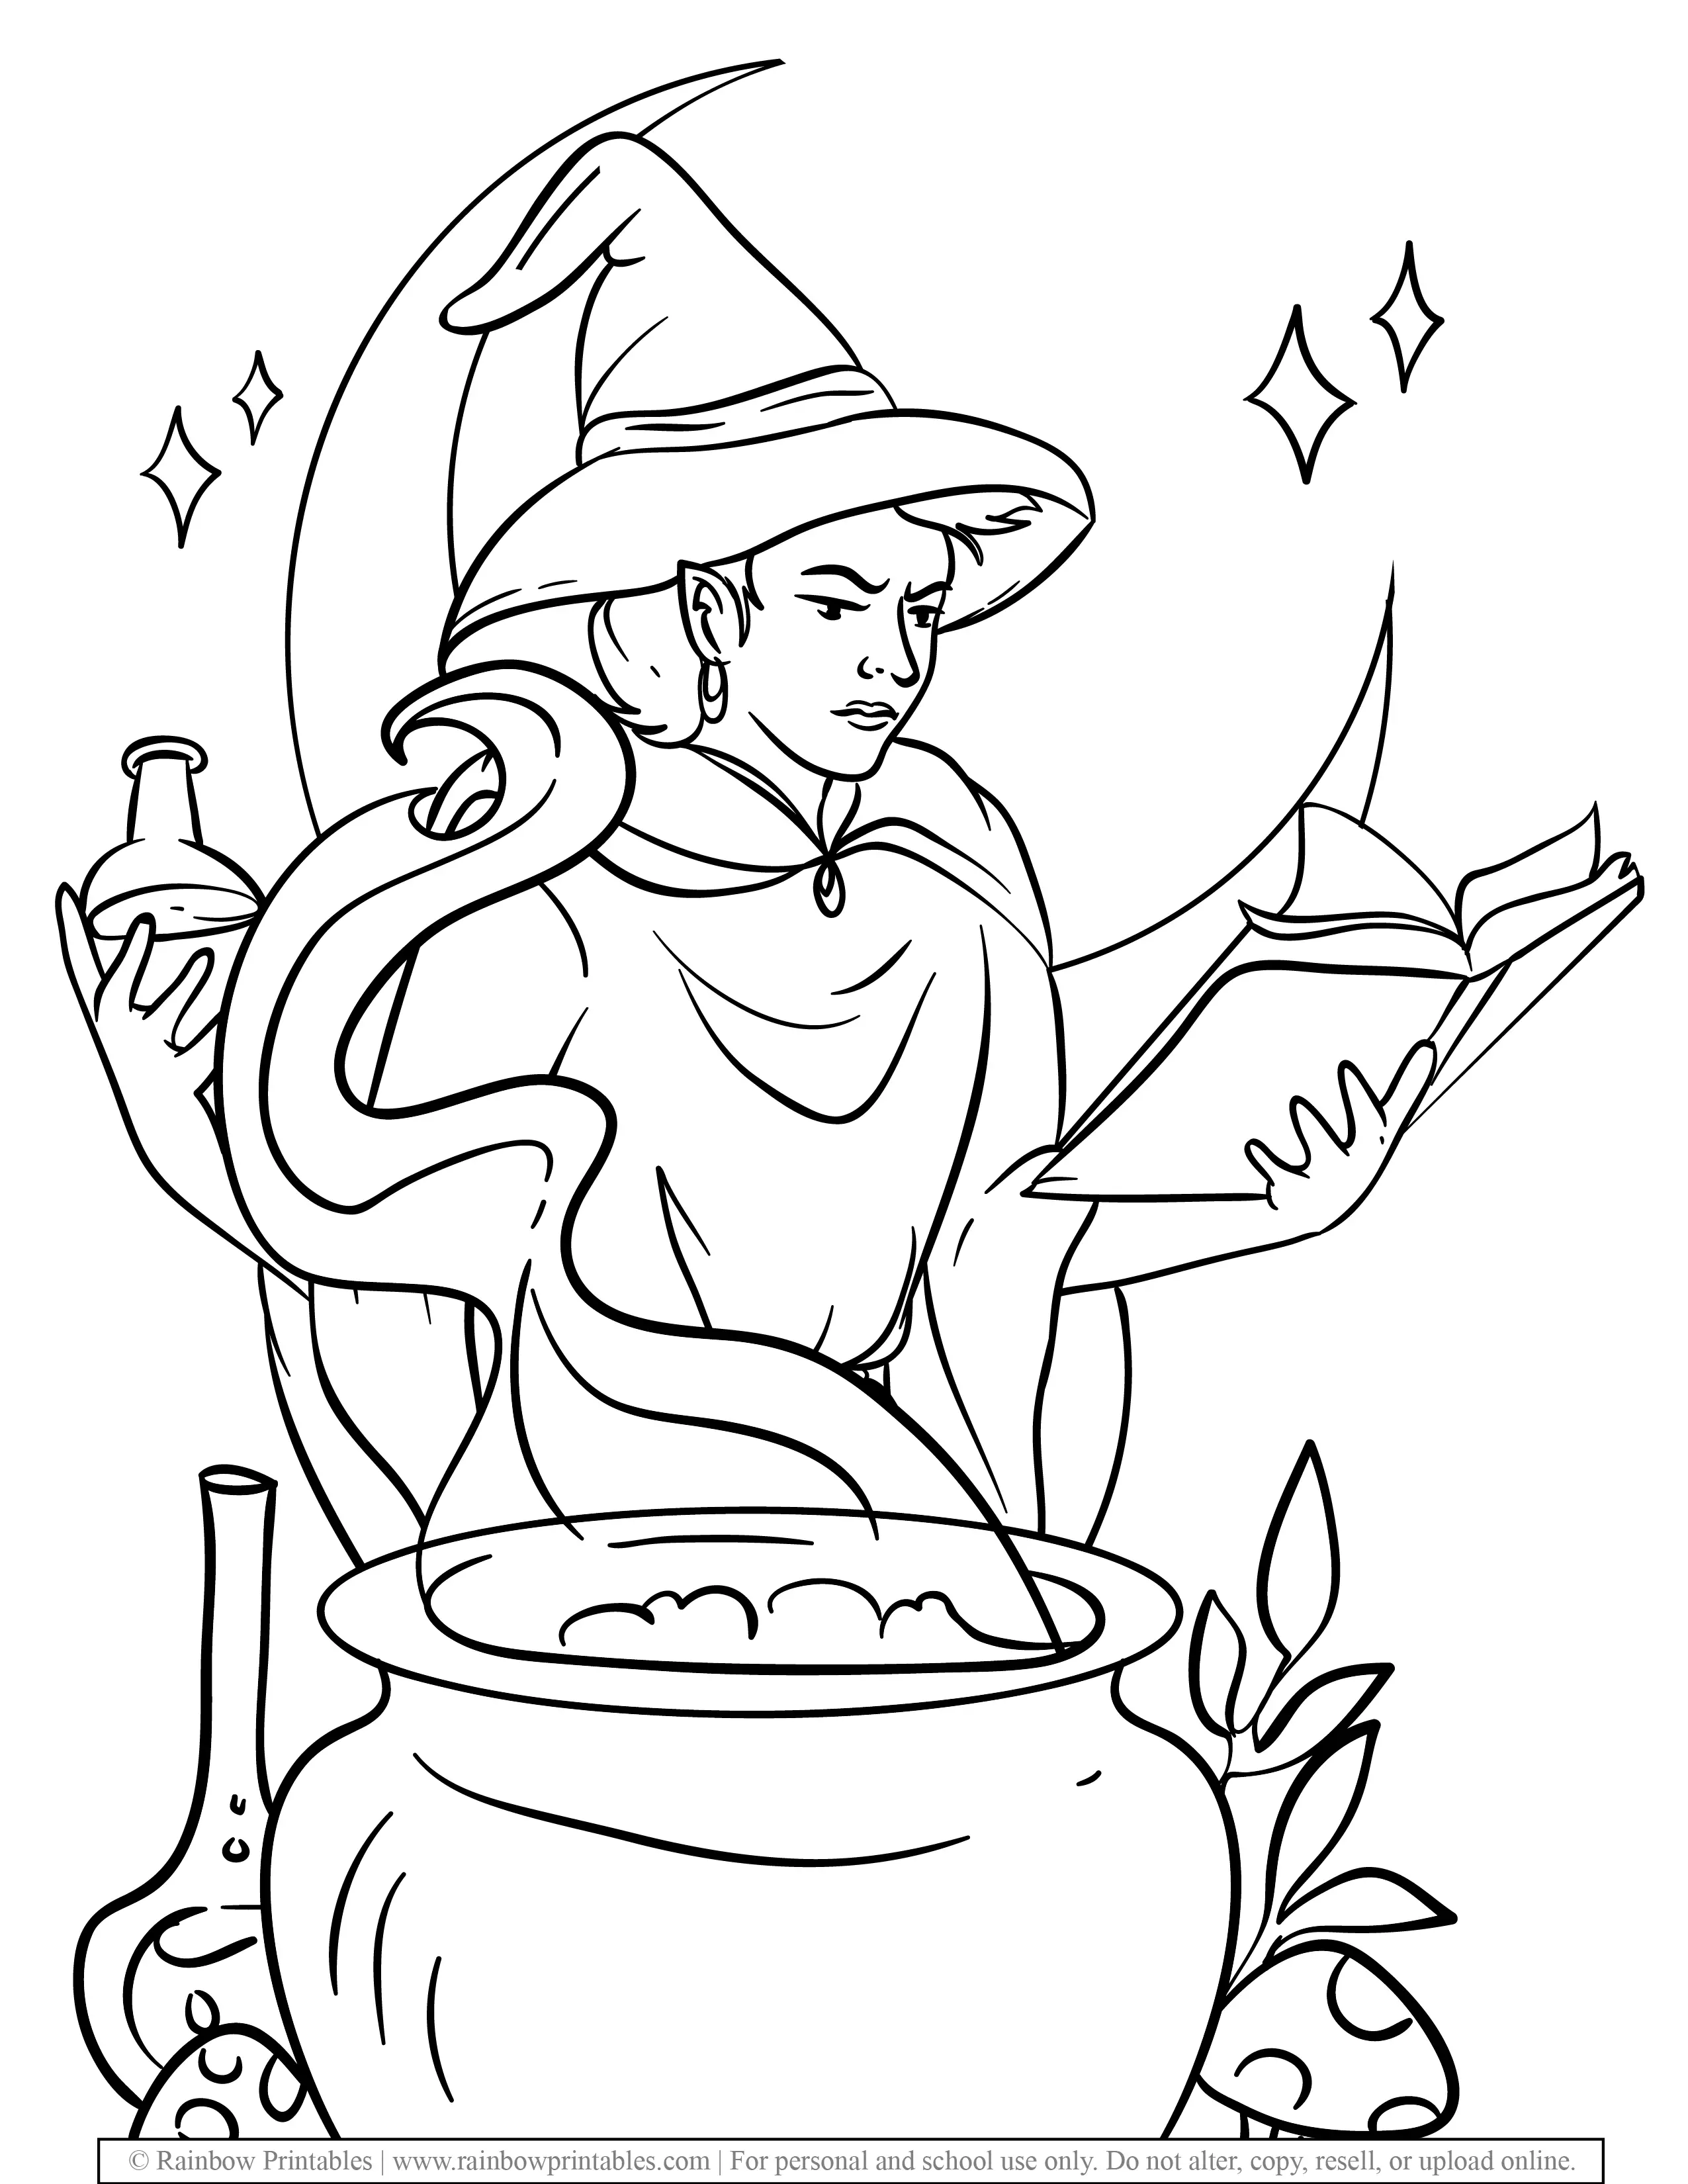 Smart Young Wizard Holding Potion Cauldron Young Pot Reading recipes Wizard Hat Cloak Robe Halloween Coloring Pages for Kids Fantasy